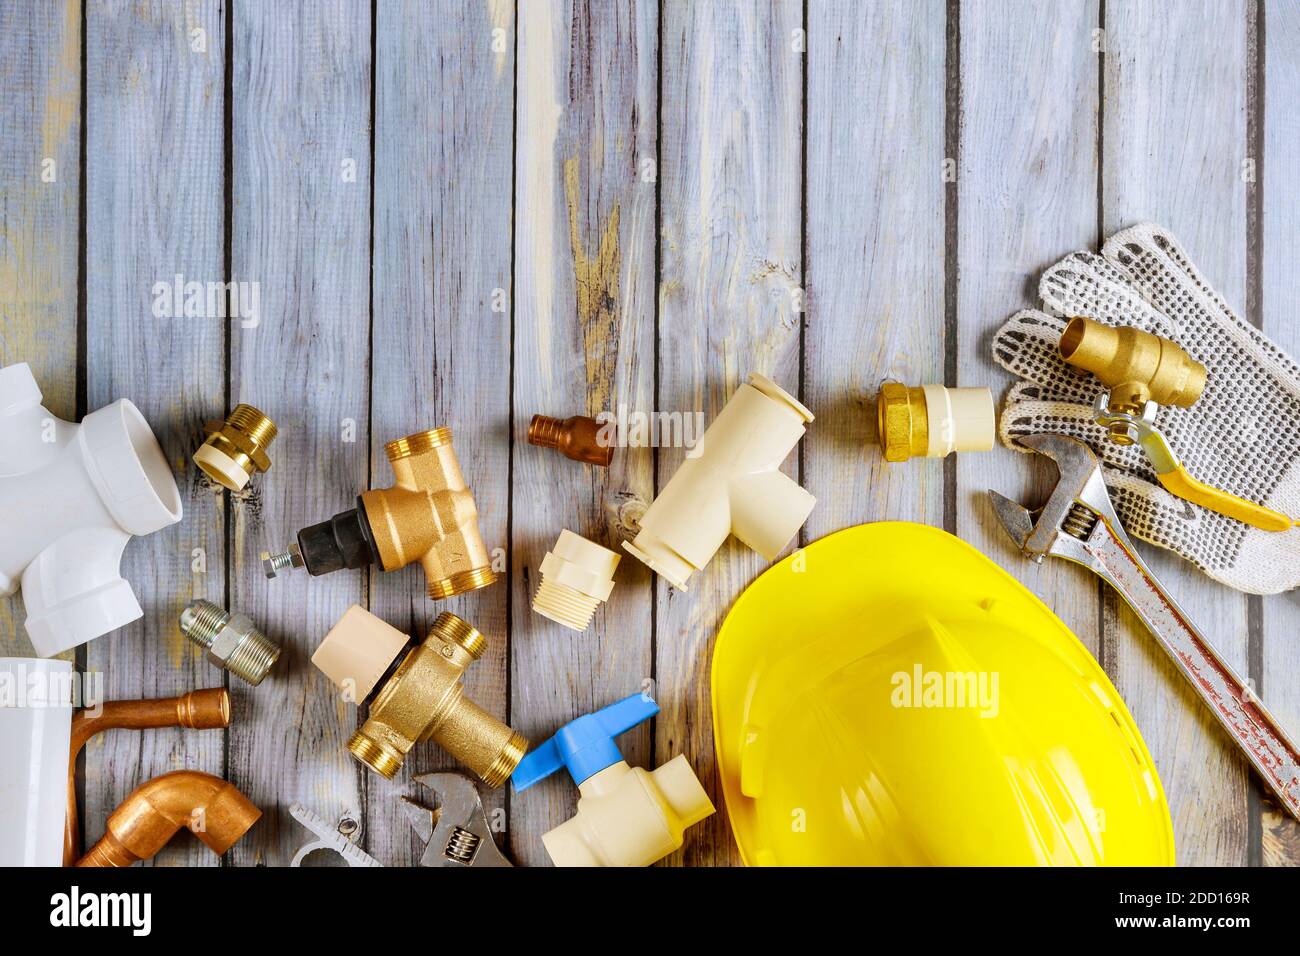 Plumbing tools repair bathroom fixtures fittings are of different construction on wooden worktable. Stock Photo